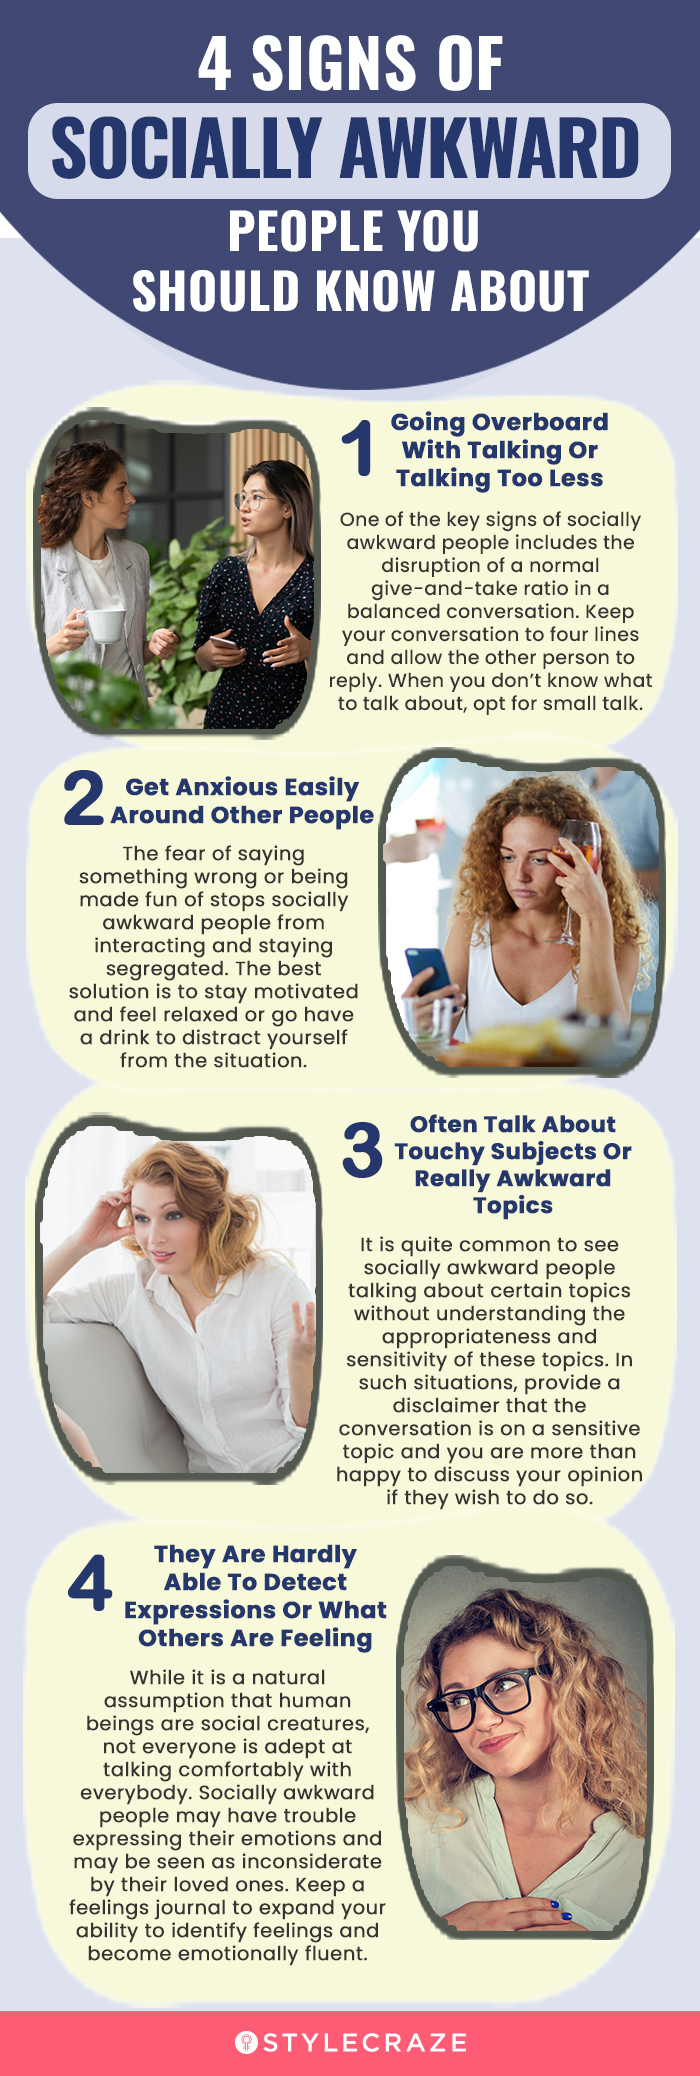 4 signs of socially awkward people you should know about (infographic)